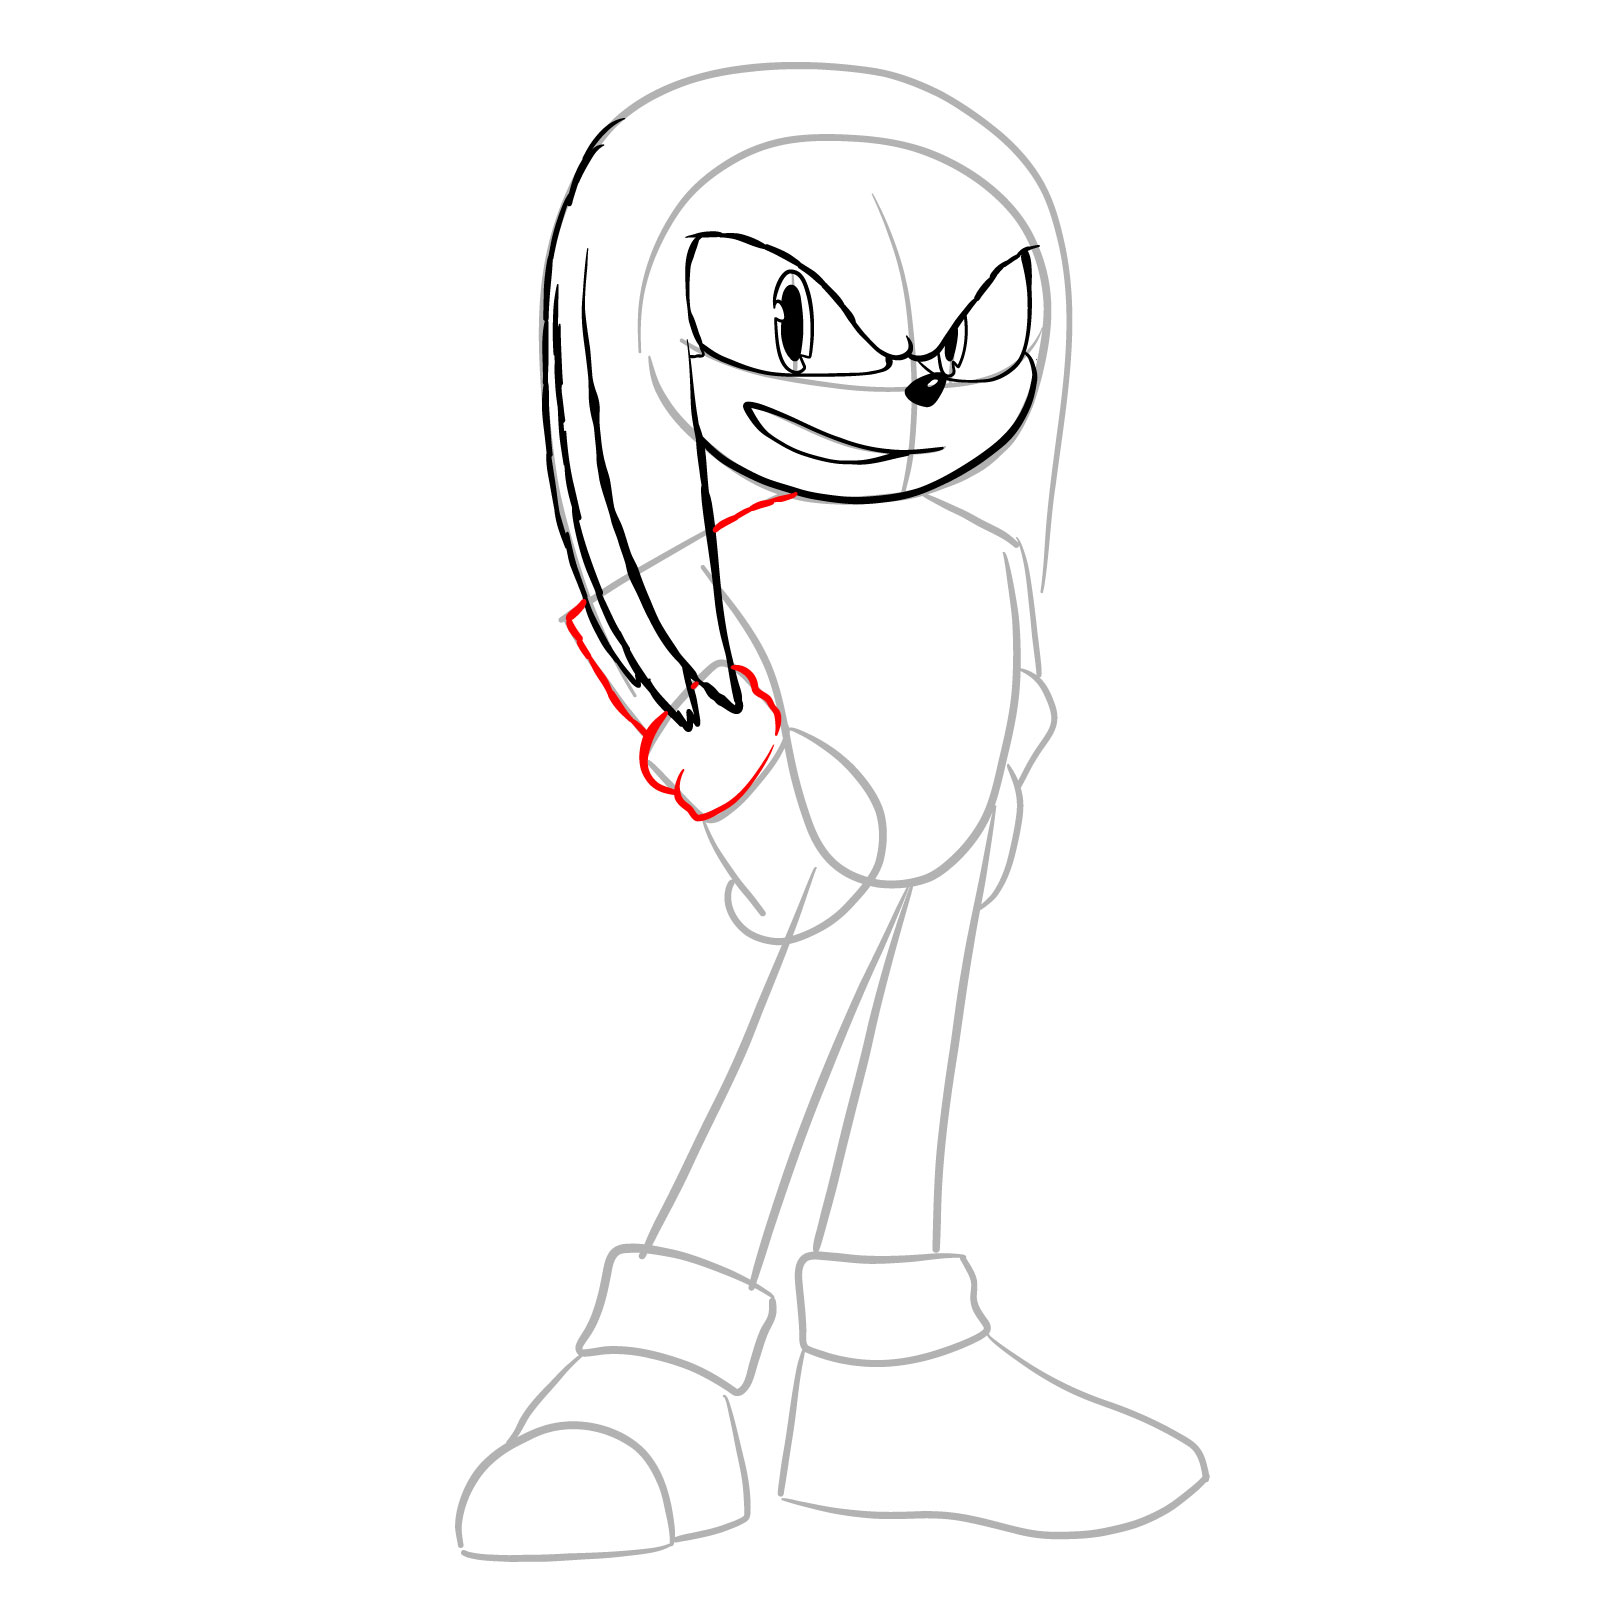 How to draw Knuckles from the movie - step 12